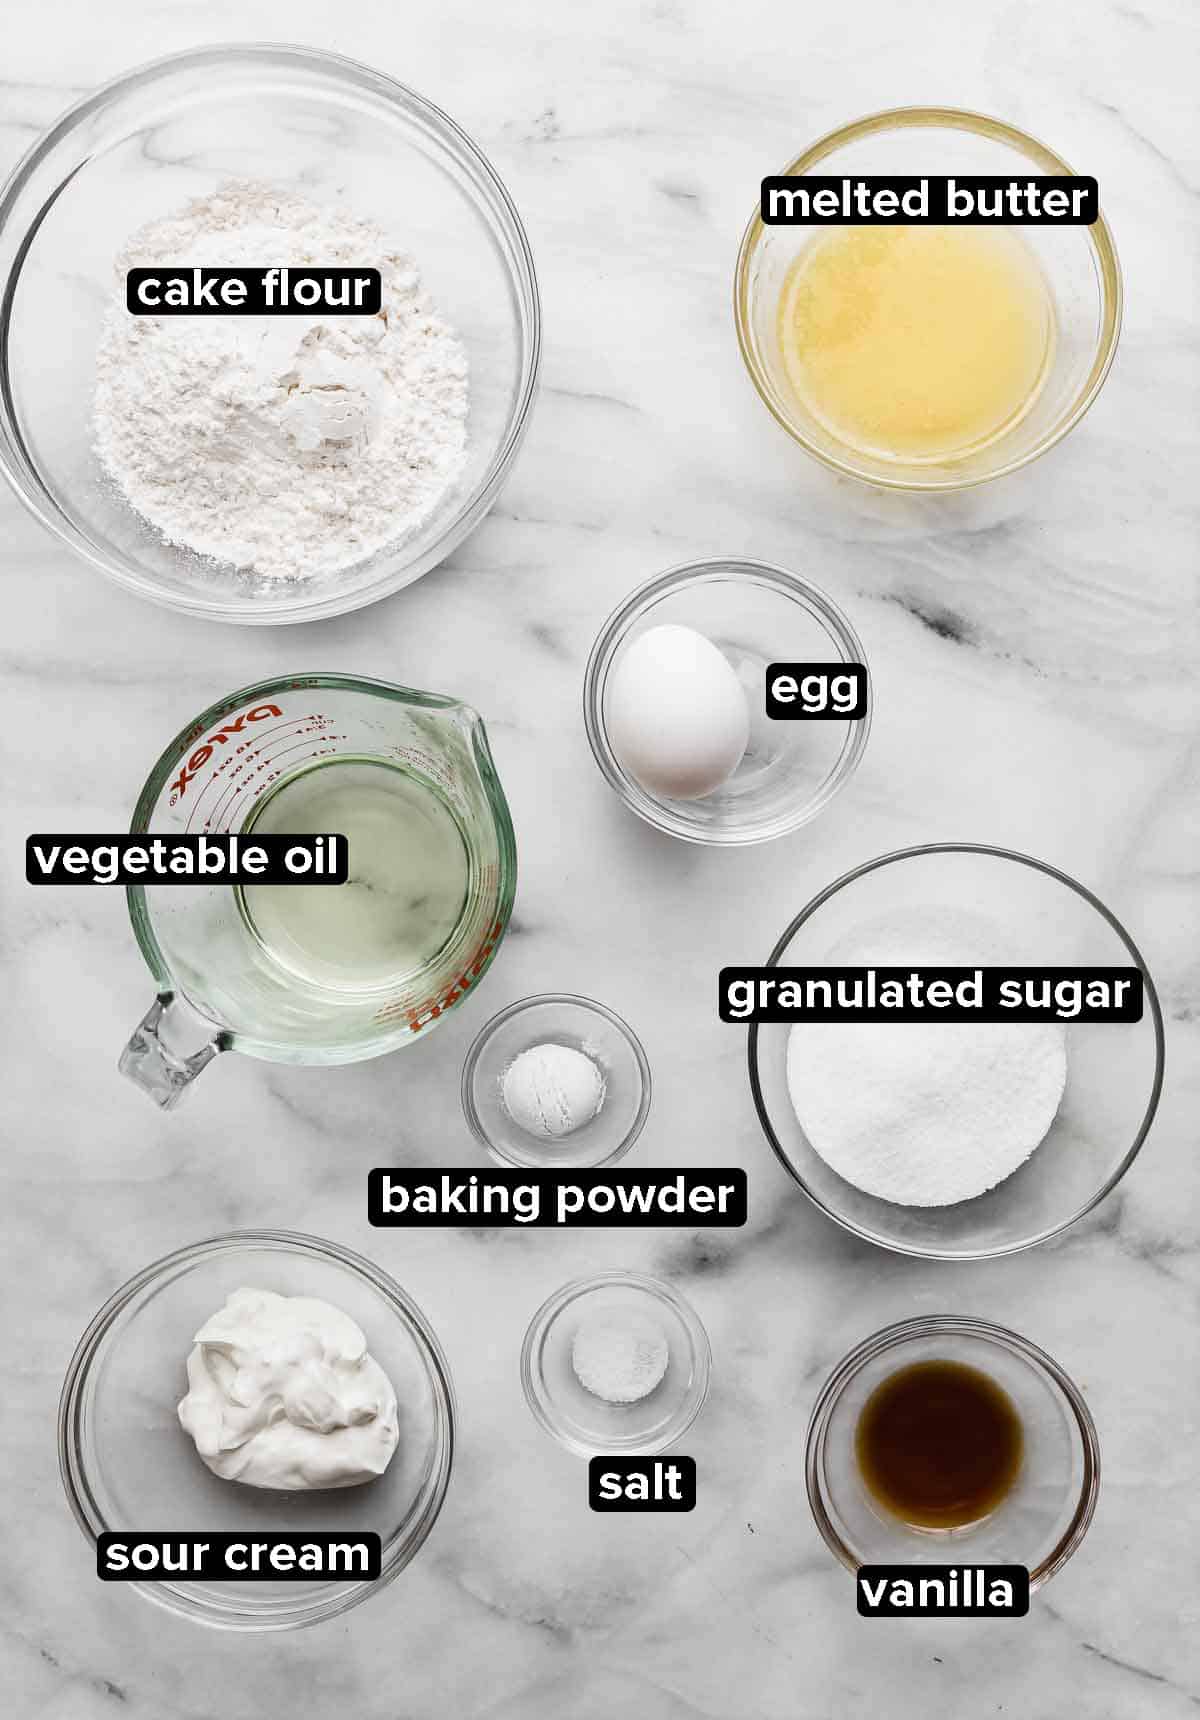 Vanilla Mini Cupcakes ingredients portioned into glass bowls on a white marble background, ingredients include: vegetable oil, cake flour, butter, egg, sugar, sour cream, vanilla, salt, baking powder.